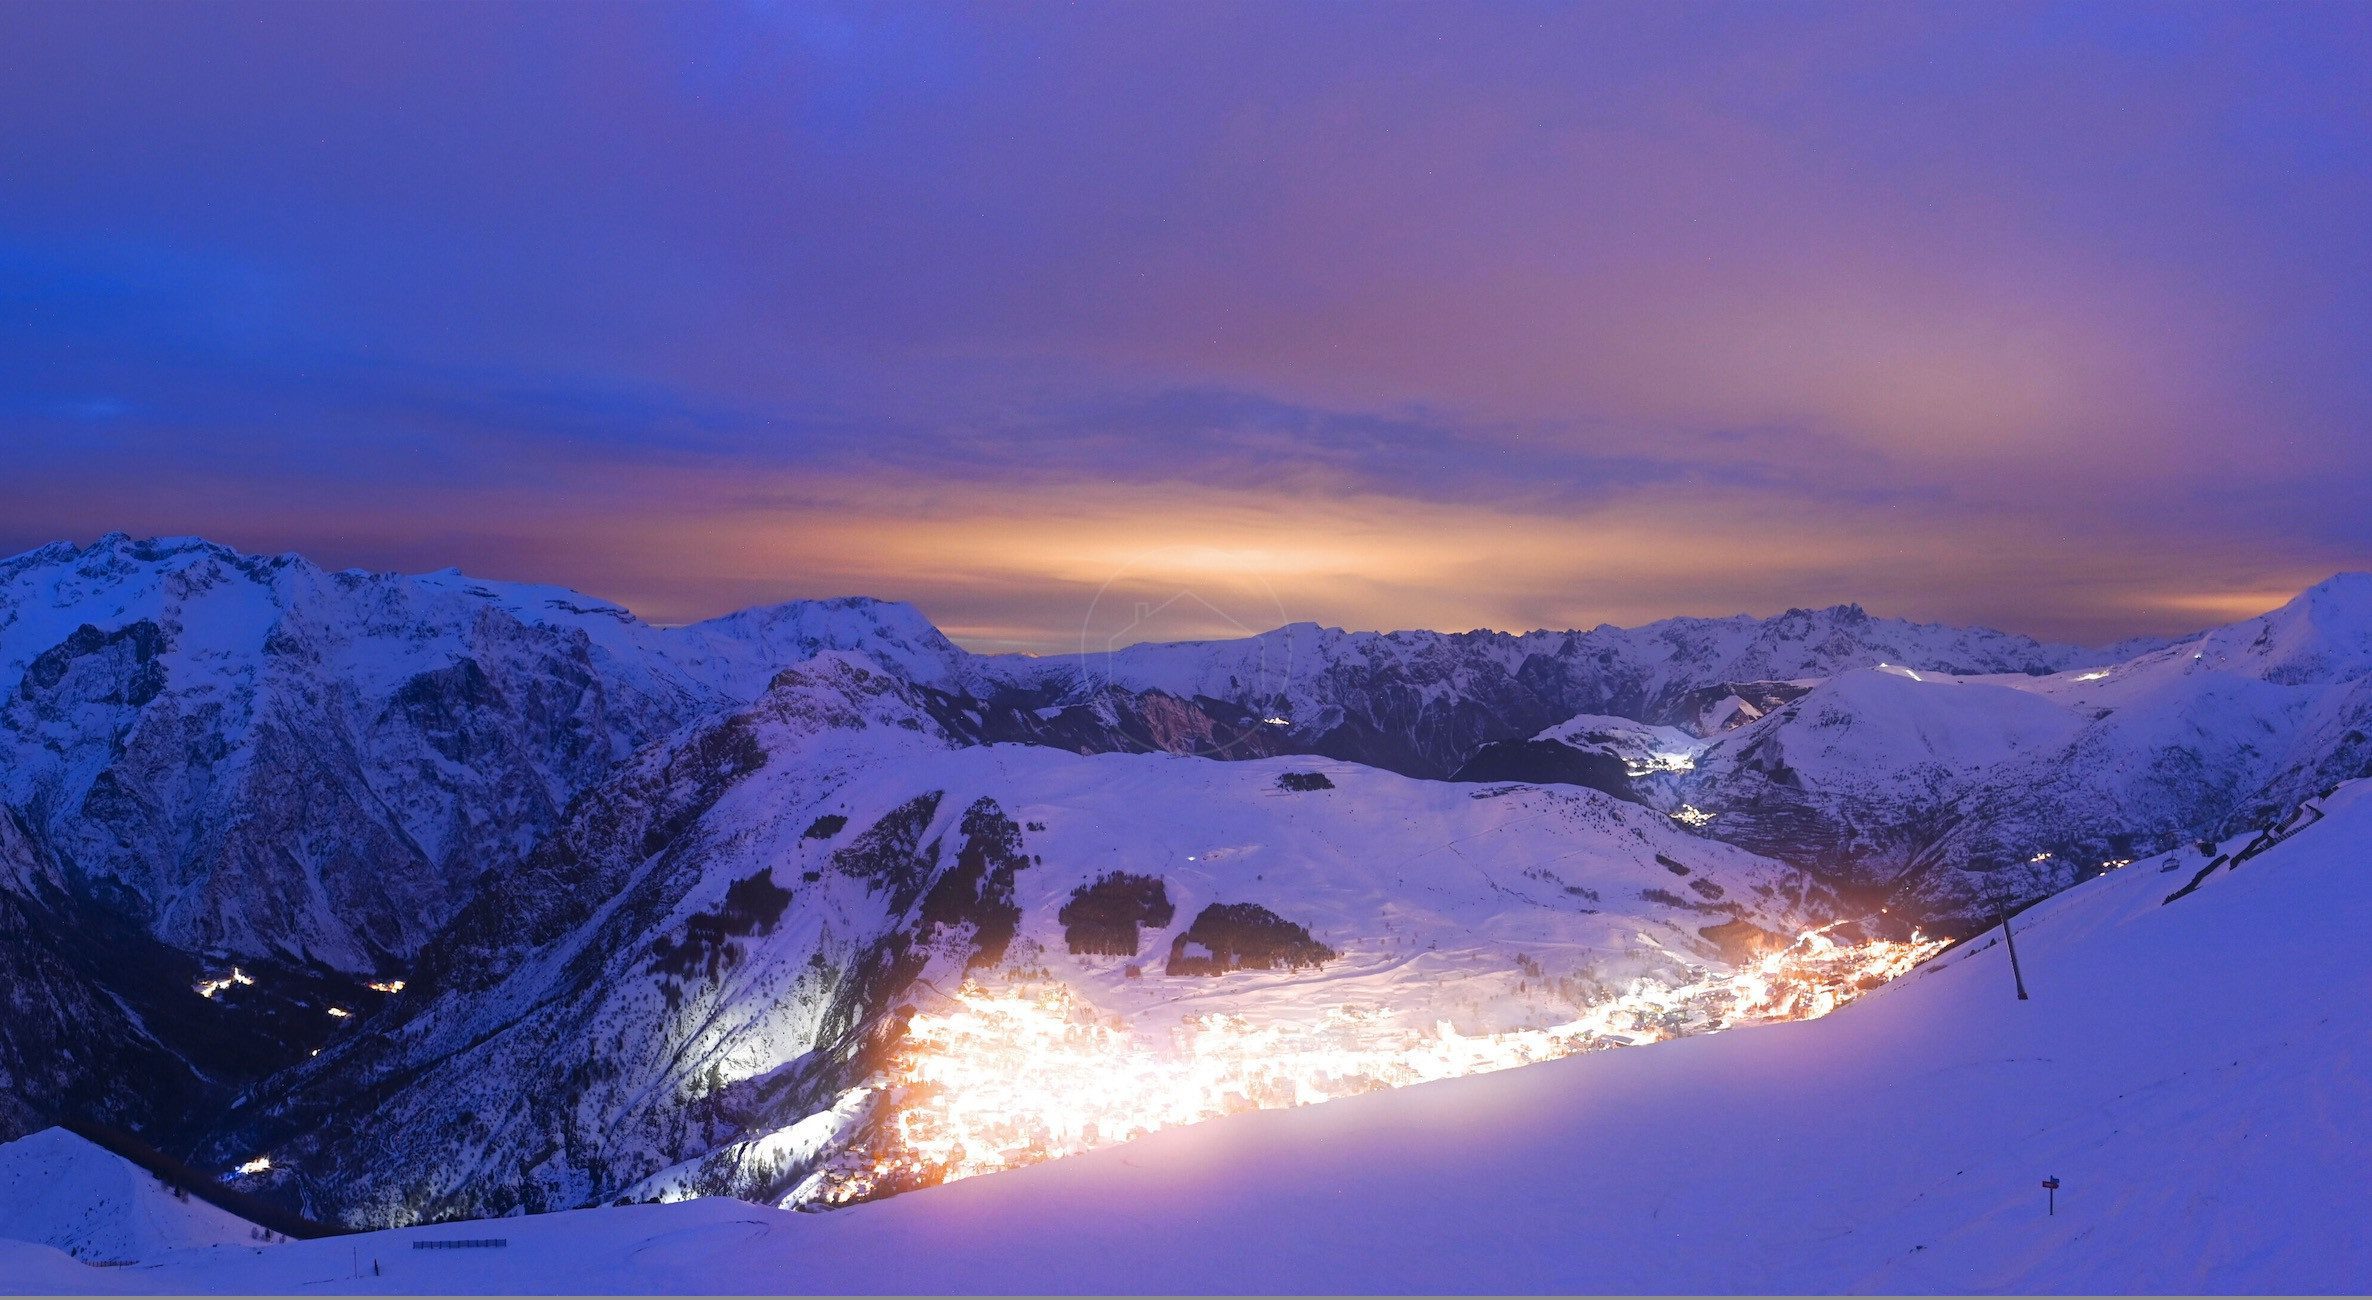 Find your perfect ski home in Les Deux Alpes with properties selected by Domosno for their charm and potential.